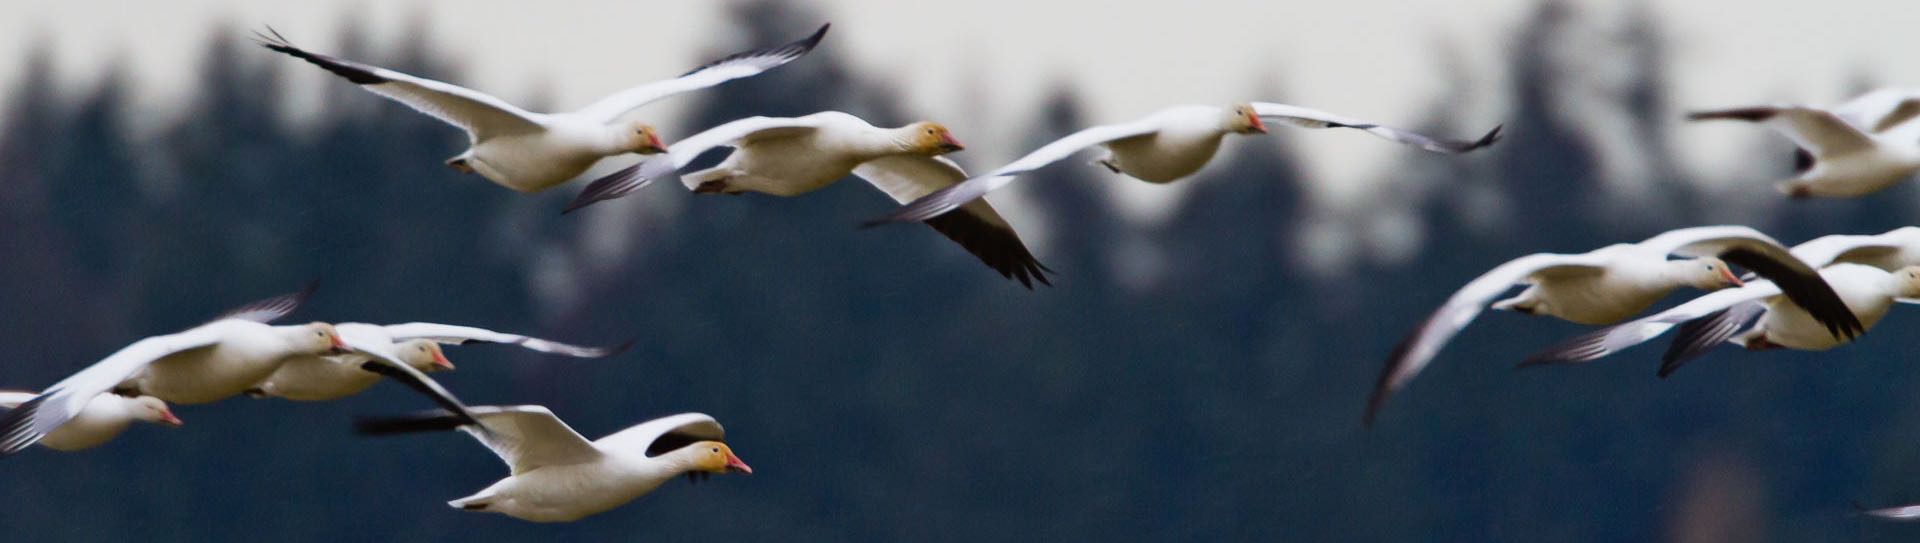 Snow geese flying in the daytime